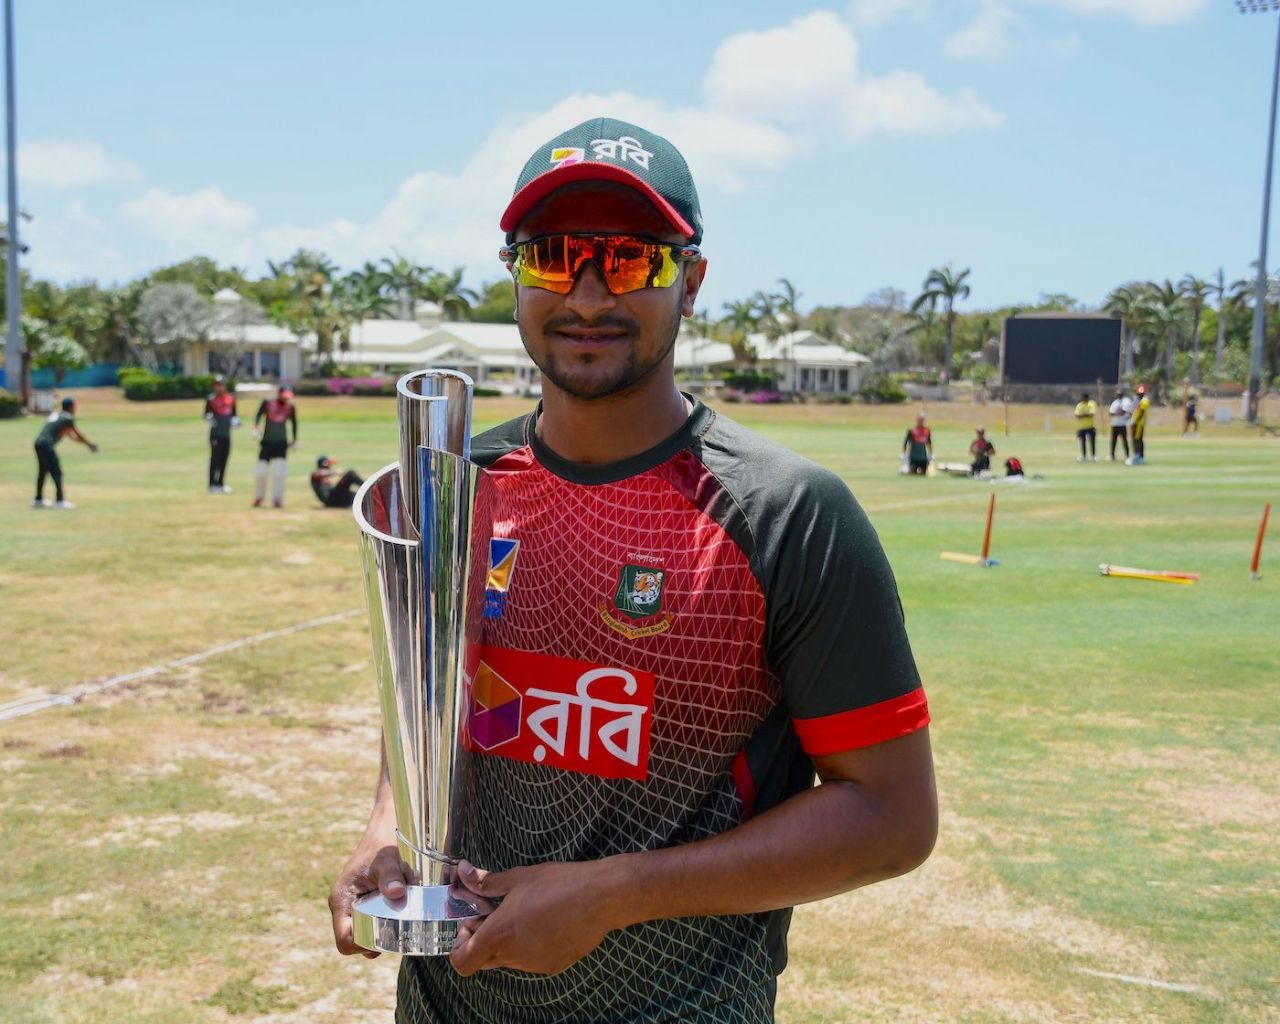 Shakib Al Hasan with the ICC Women's World T20 trophy ahead of the first Test, West Indies vs Bangladesh, Coolidge Cricket Ground, Coolidge, Antigua, on July 3, 2018